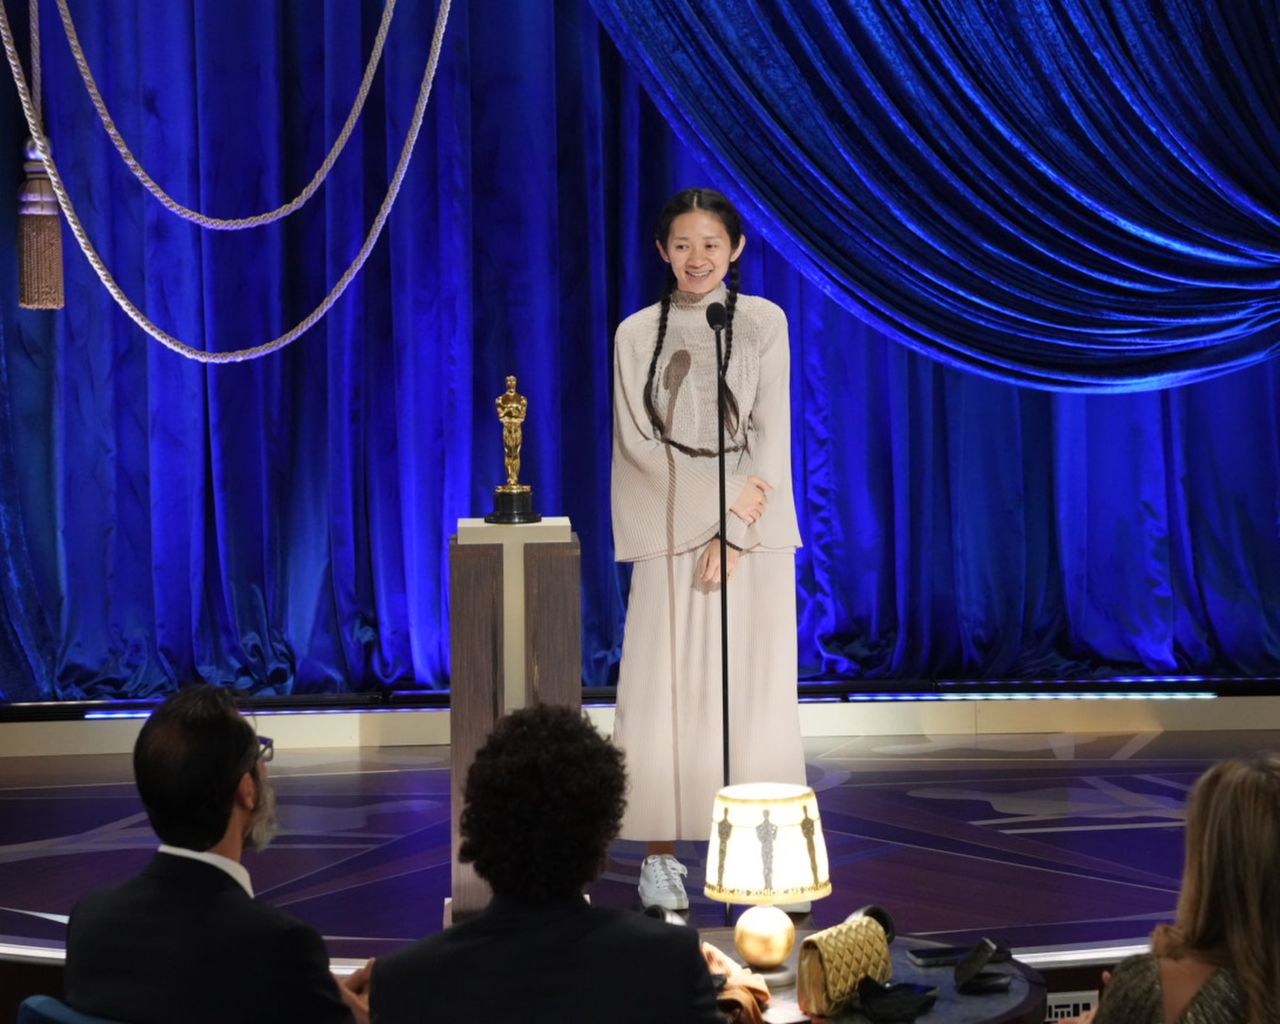 Chloé Zhao accepts the best director Oscar for "Nomadland." She is the first woman of color and the first woman of Asian descent <a href="https://www.cnn.com/2021/04/25/entertainment/chloe-zhao-oscar-win/index.html" target="_blank">to win best director.</a> "This is for anyone who has the faith and the courage to hold out to the goodness in themselves and to hold out to the goodness in each other, no matter how difficult it is to do that," she said in her acceptance speech. "You inspire me to keep going."